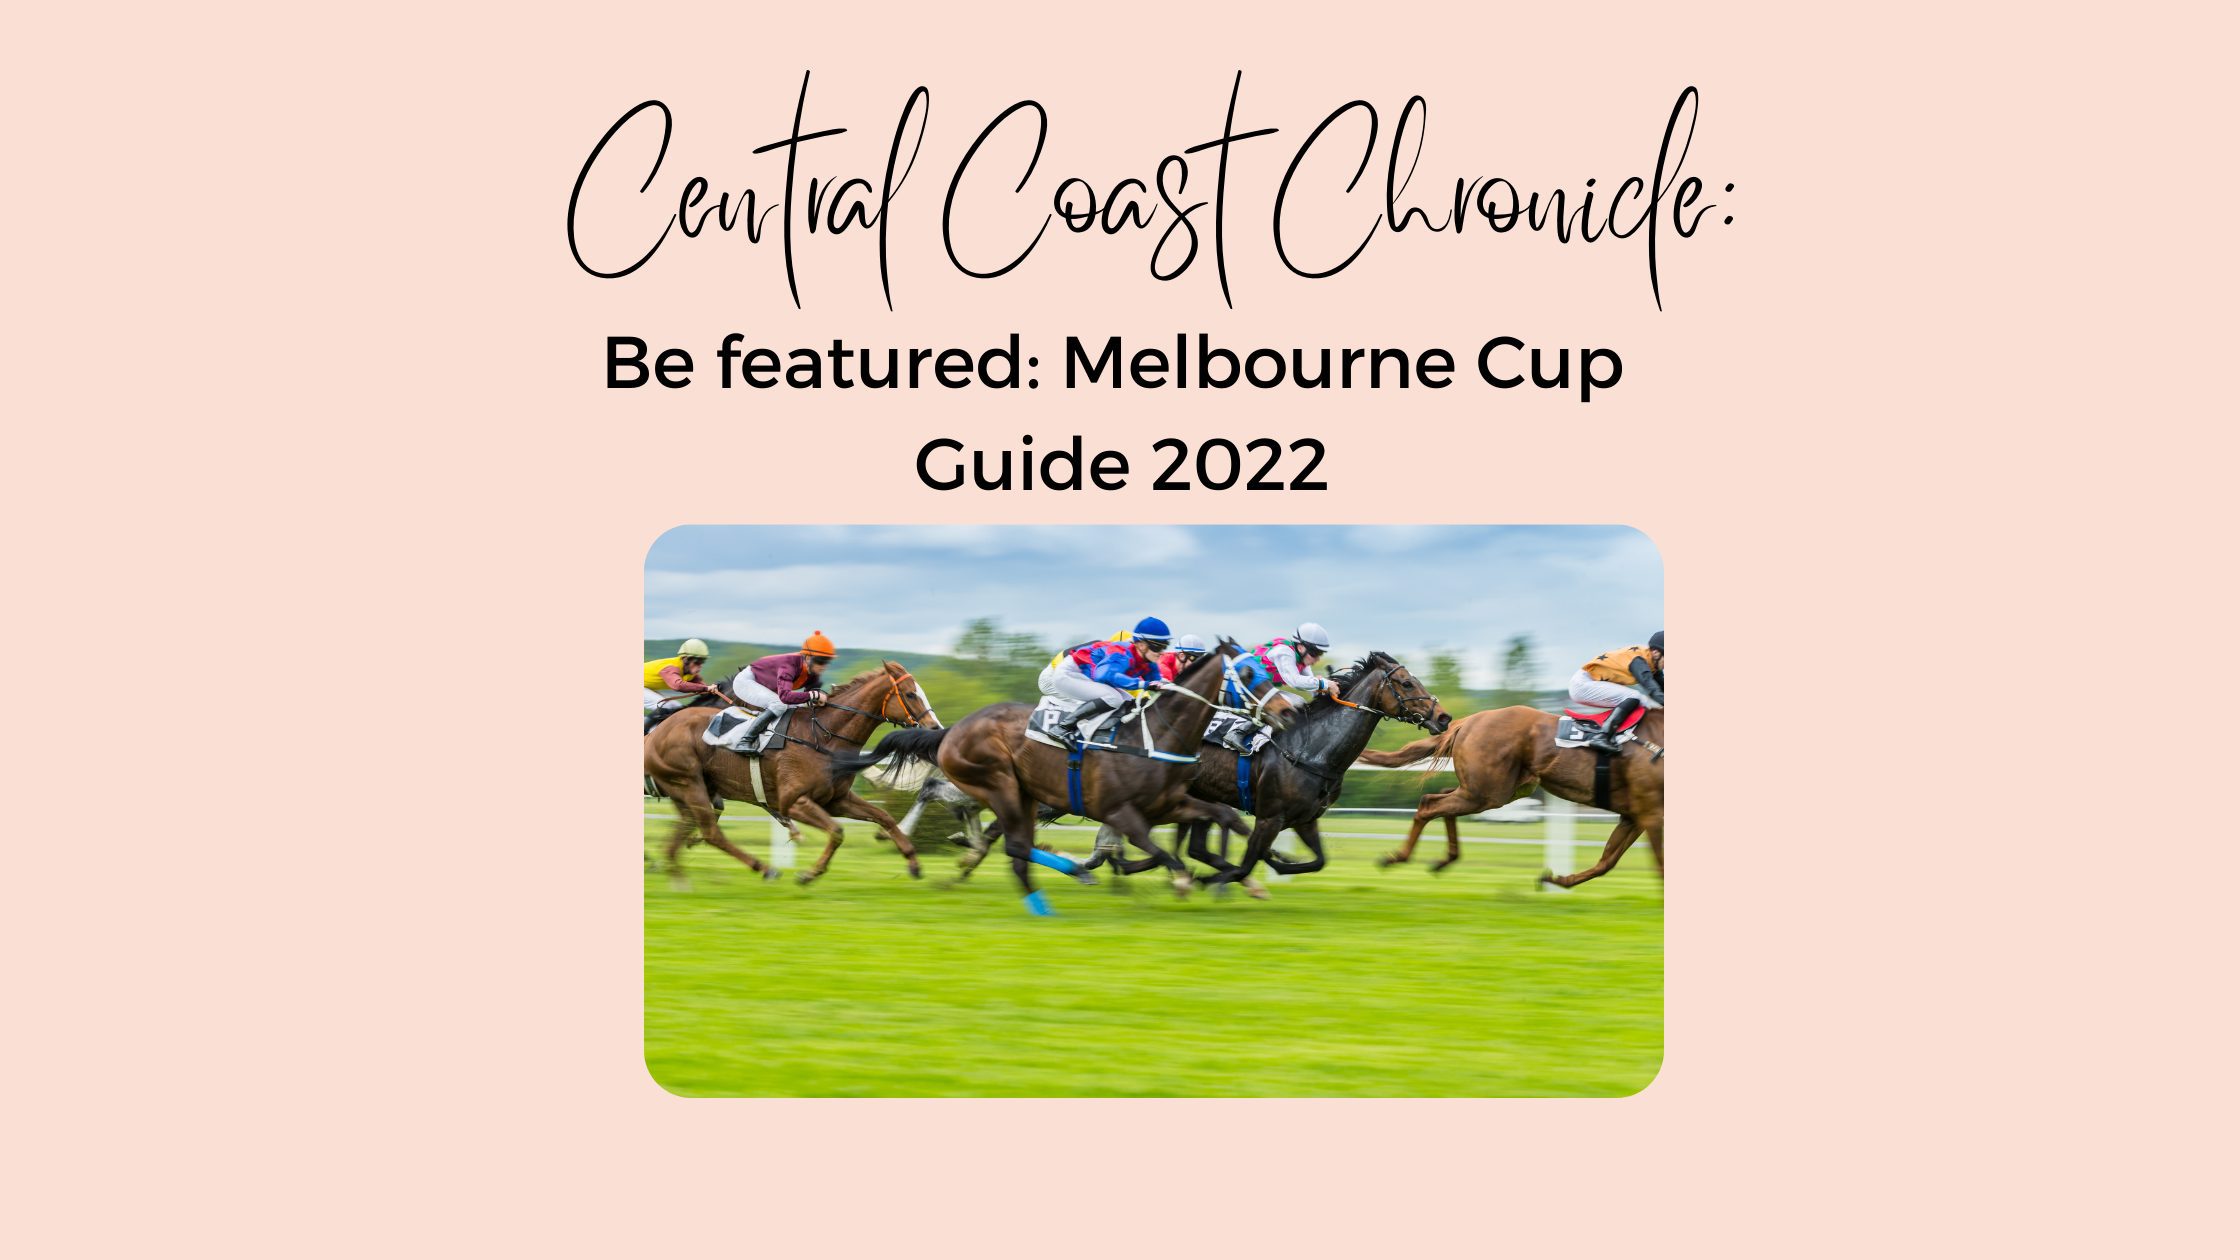 Melbourne Cup Guide 2022 picture of horses racing